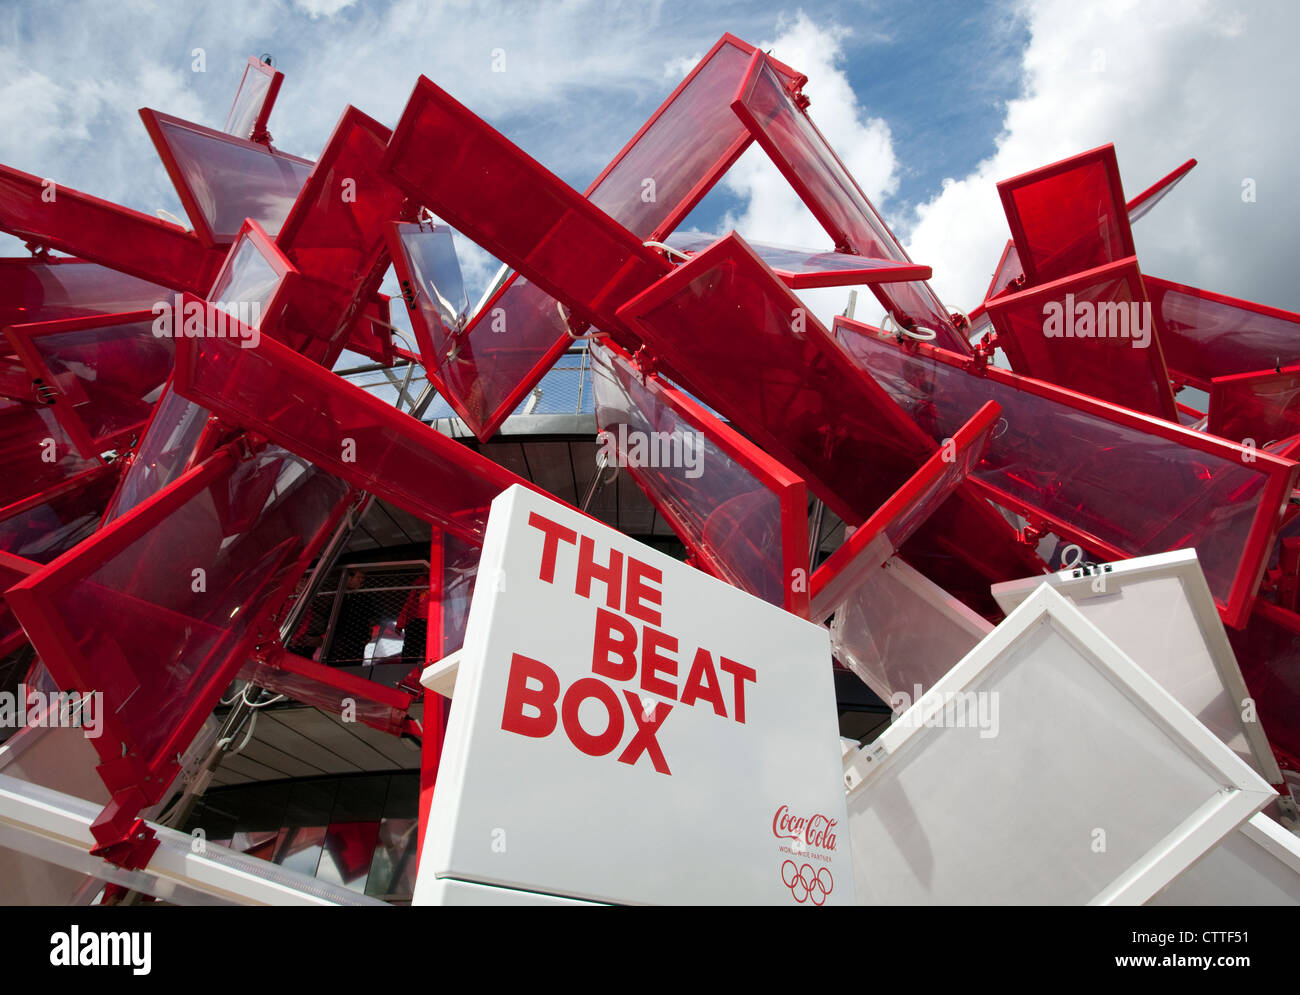 London 2012 Olympic Games - The Beat Box musical feature Stock Photo